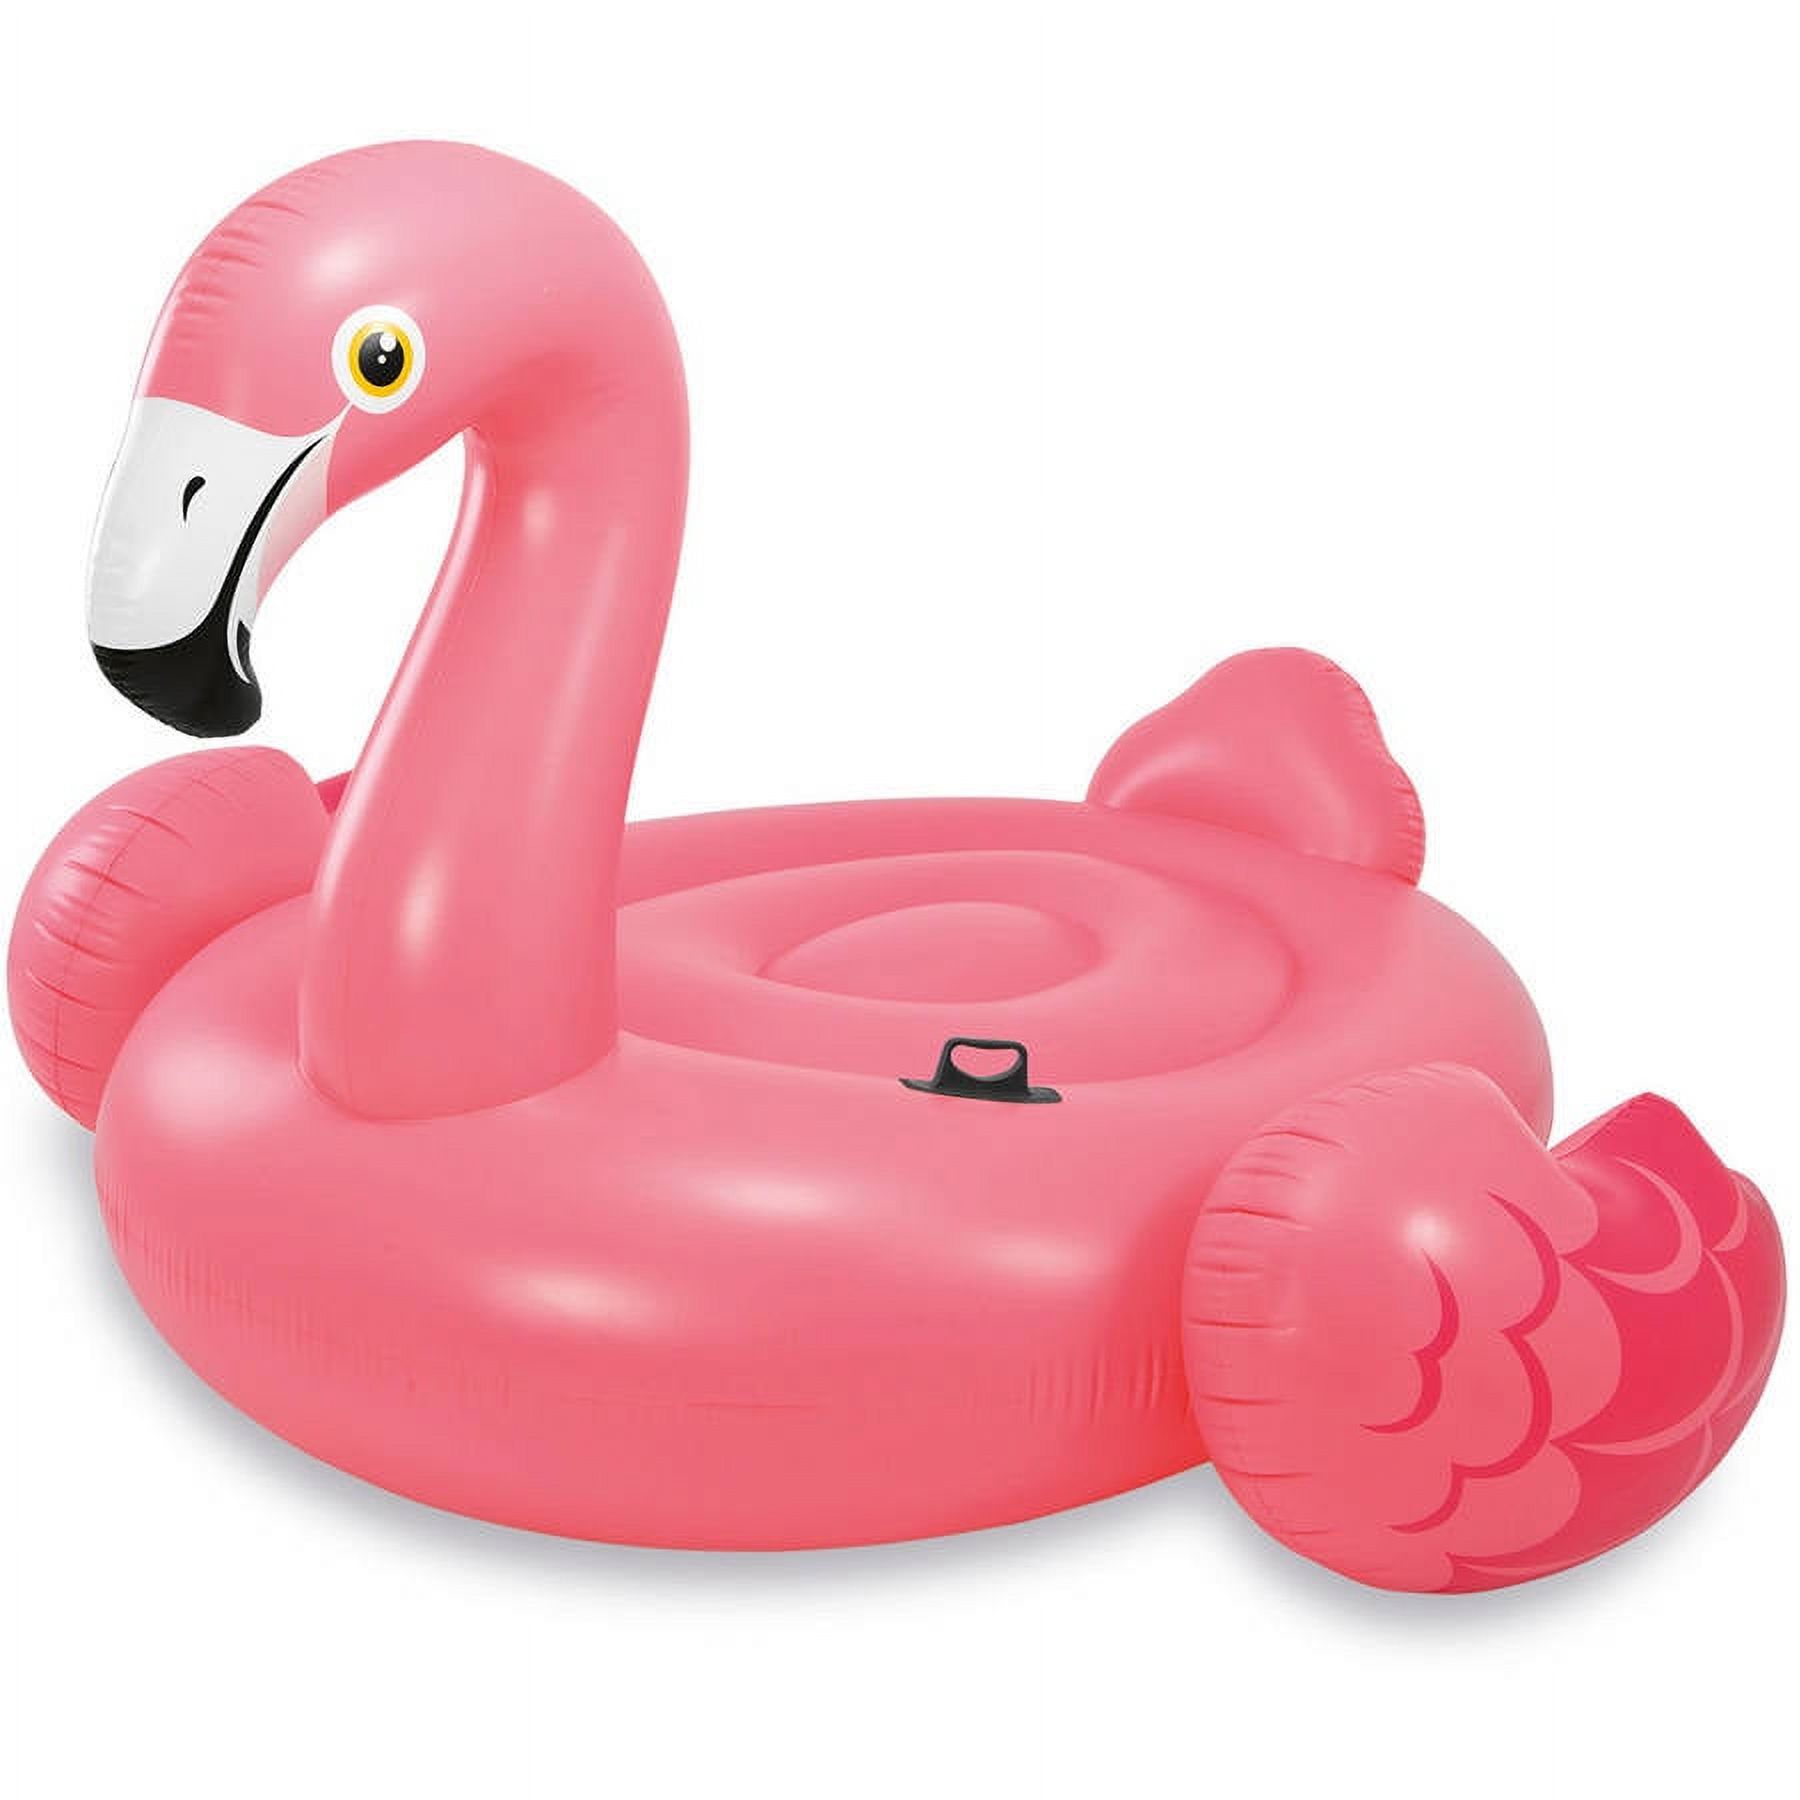 Large Pink Flamingo Ride-On Inflatable Pool Float with Handles for Ages 3+ - image 1 of 3